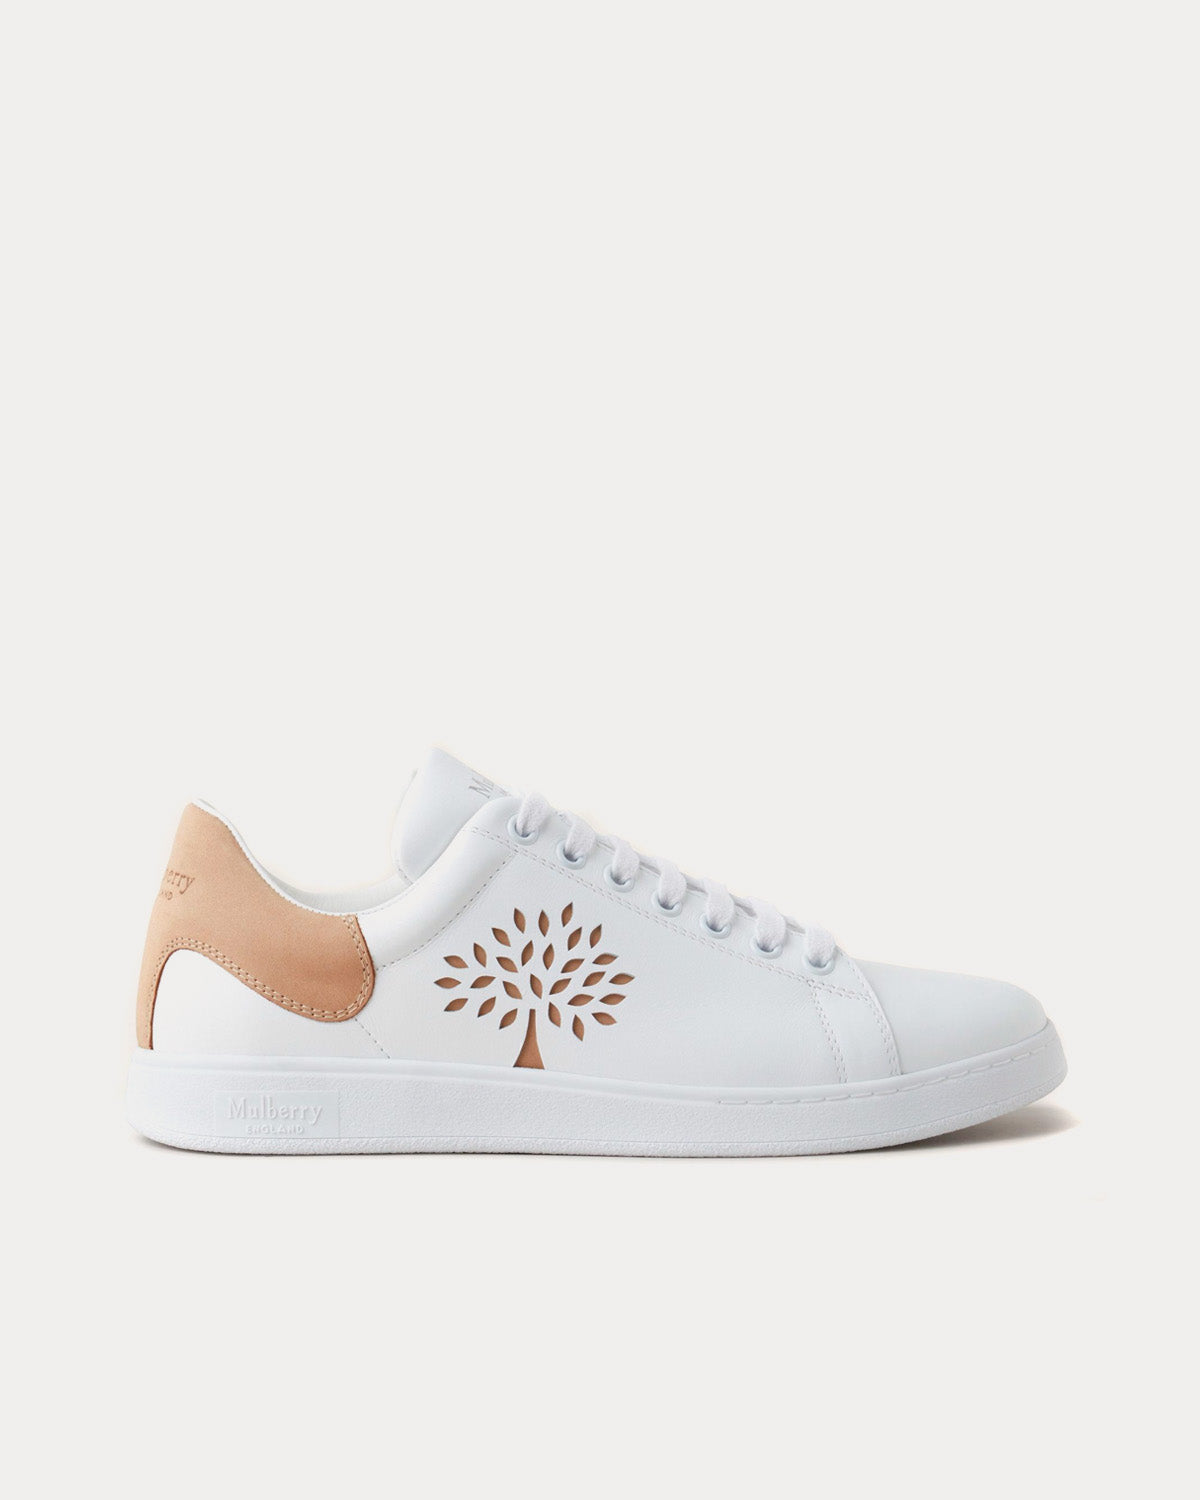 Mulberry - Tree Tennis Bovine Leather Maple Low Top Sneakers